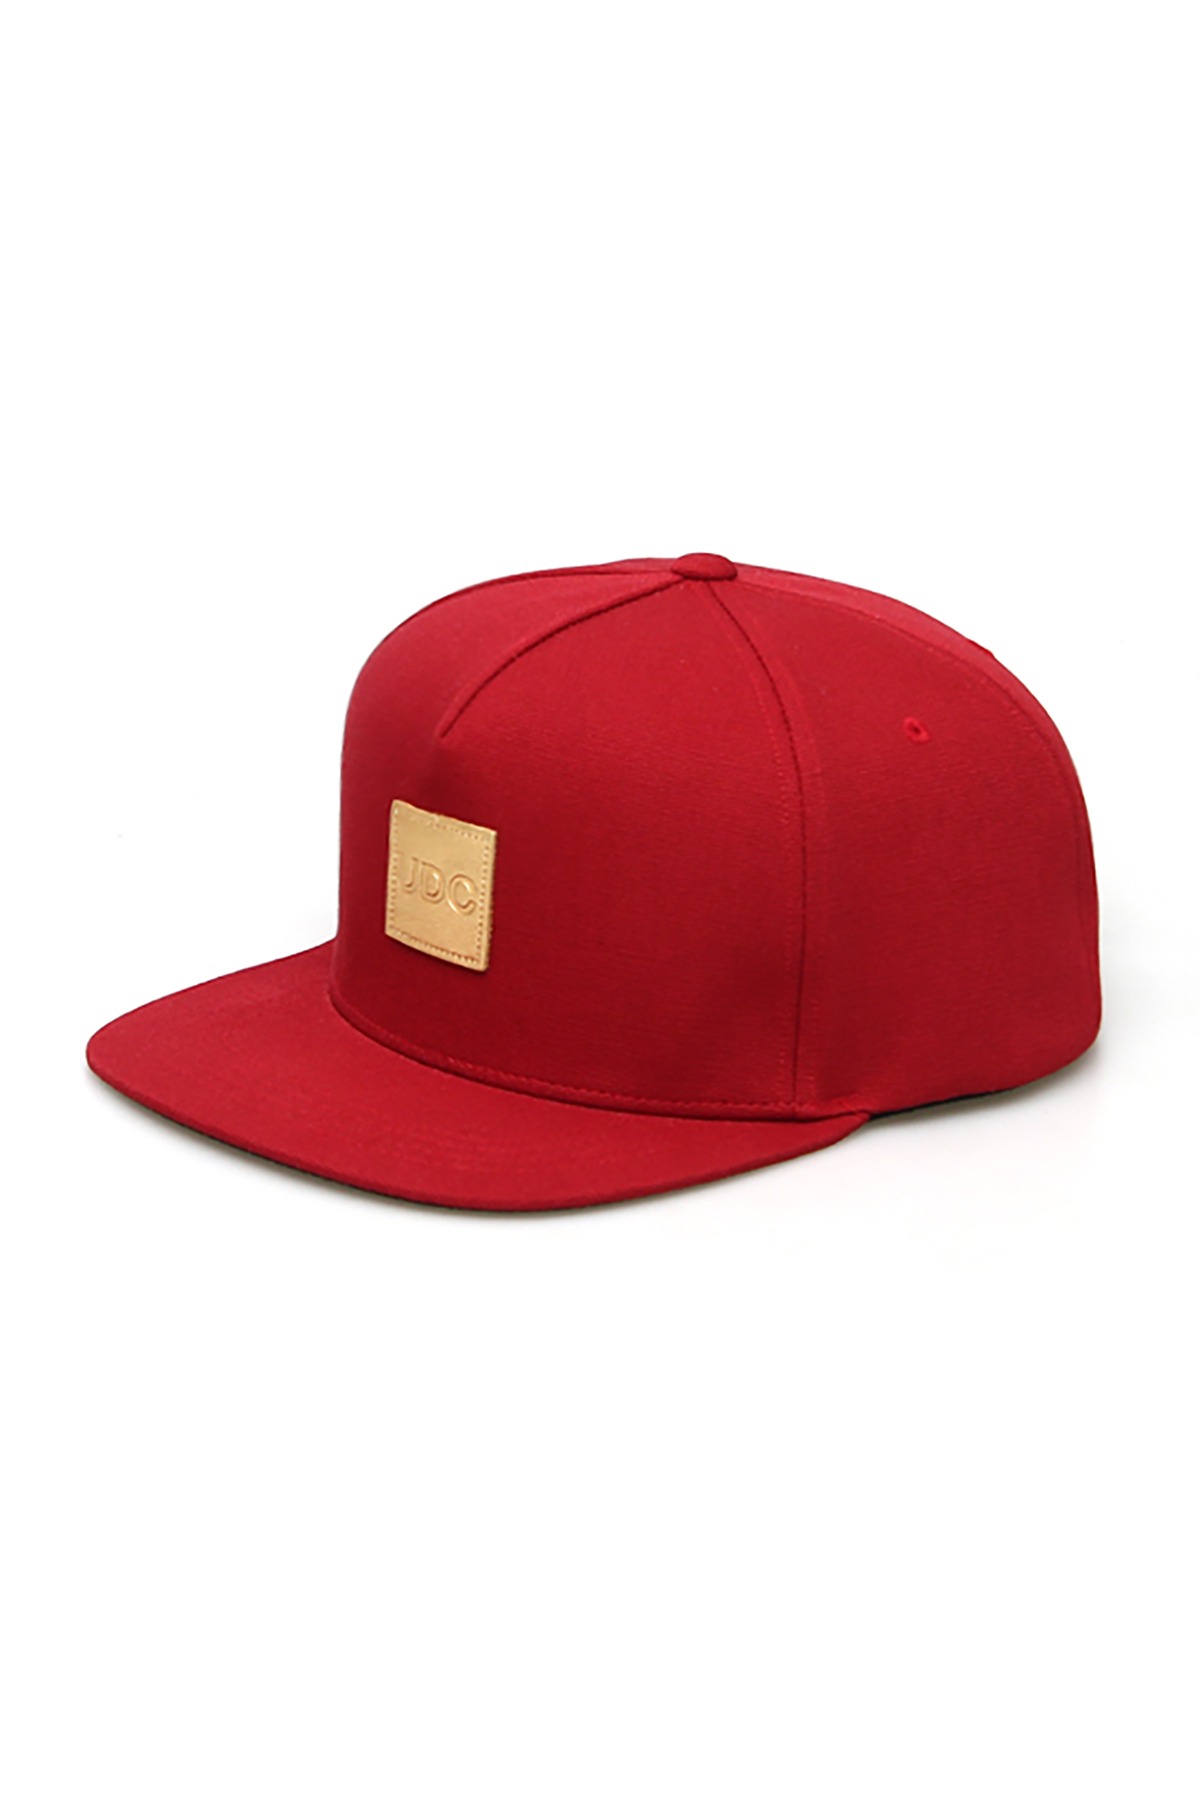 SQUARE GOLD LABEL / SUNSET RED